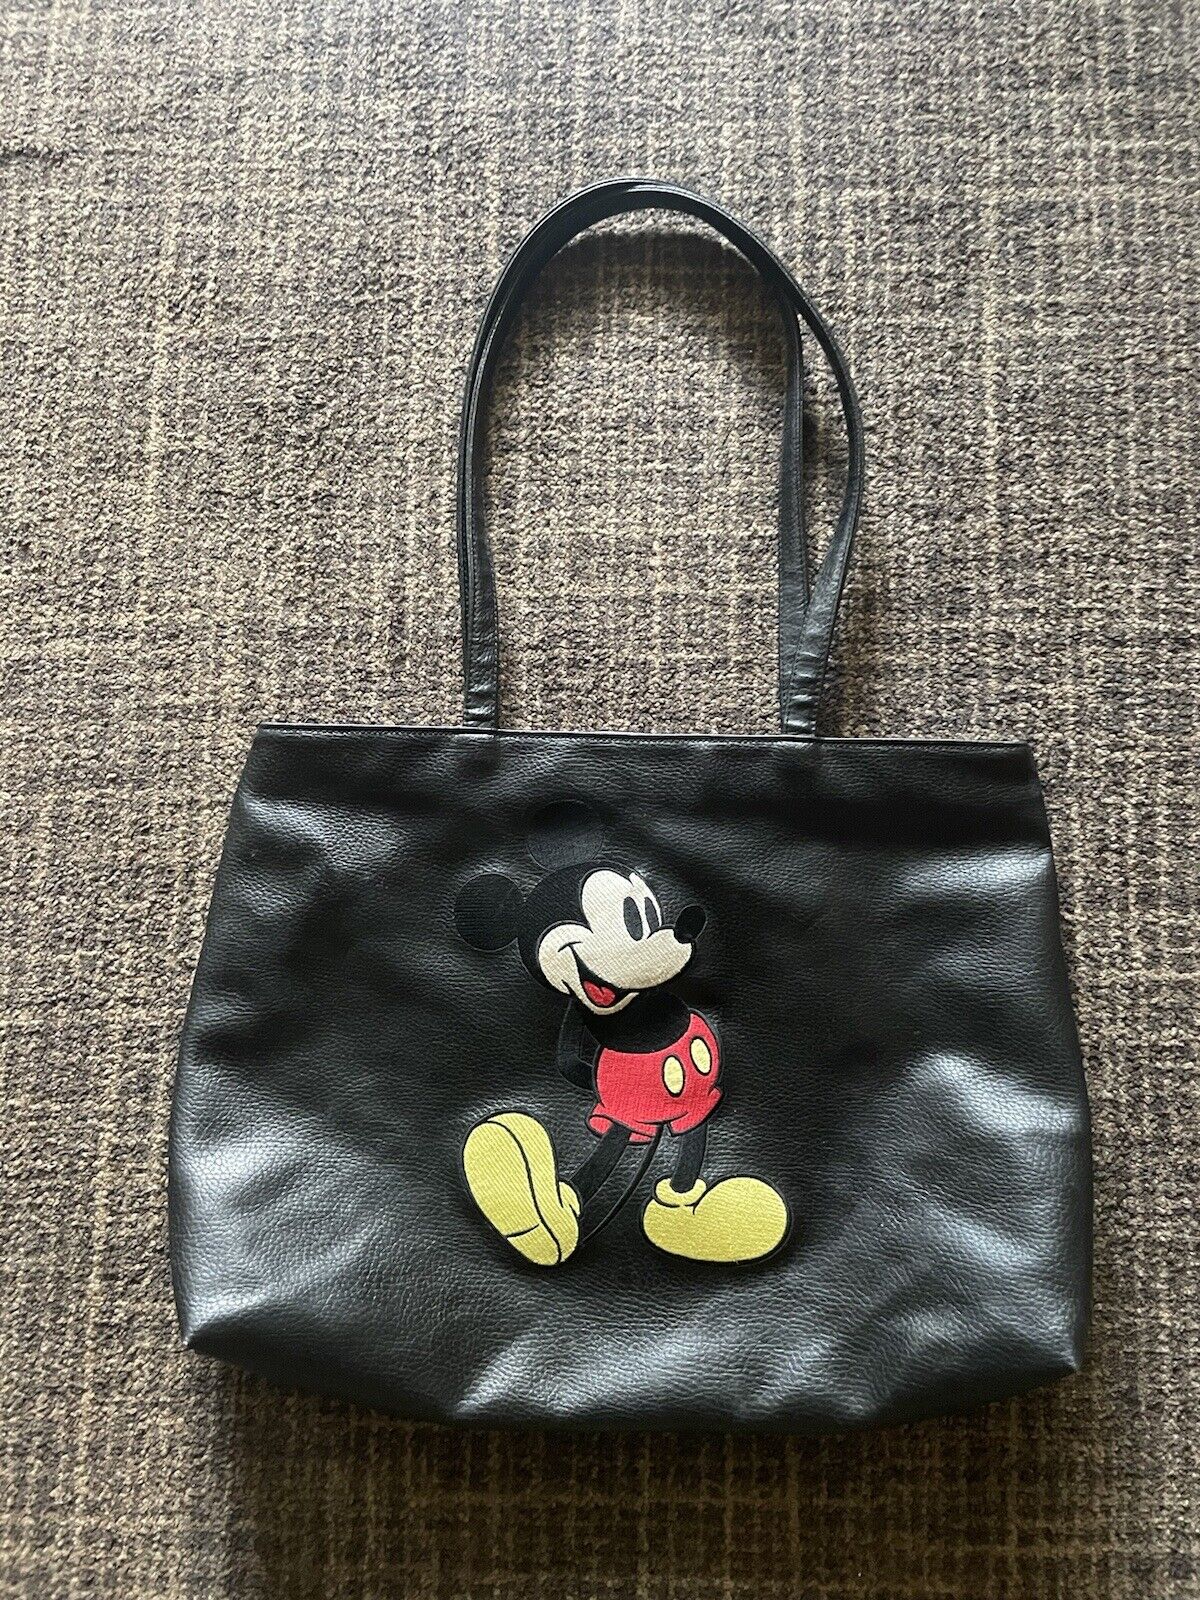 VINTAGE Walt Disney Company Tote Black Leather Mickey Mouse Embroidered BAG